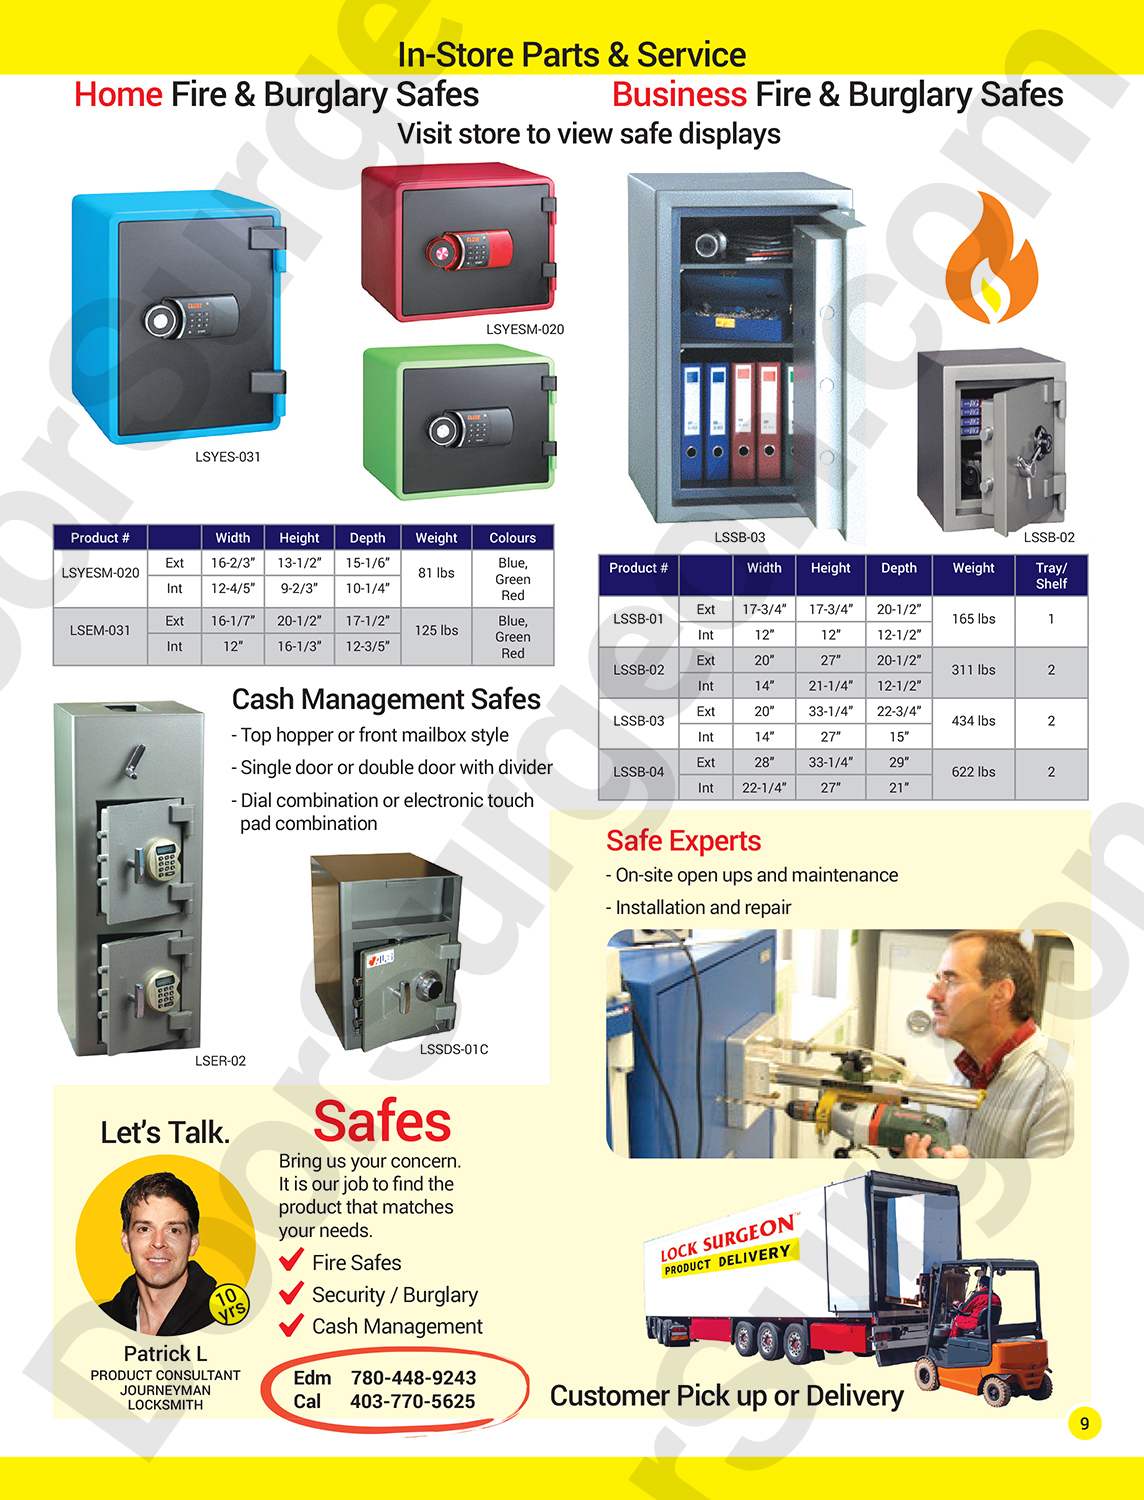 Residential home fire & burglary safes in a variety of sizes with repair & delivery safe-service.